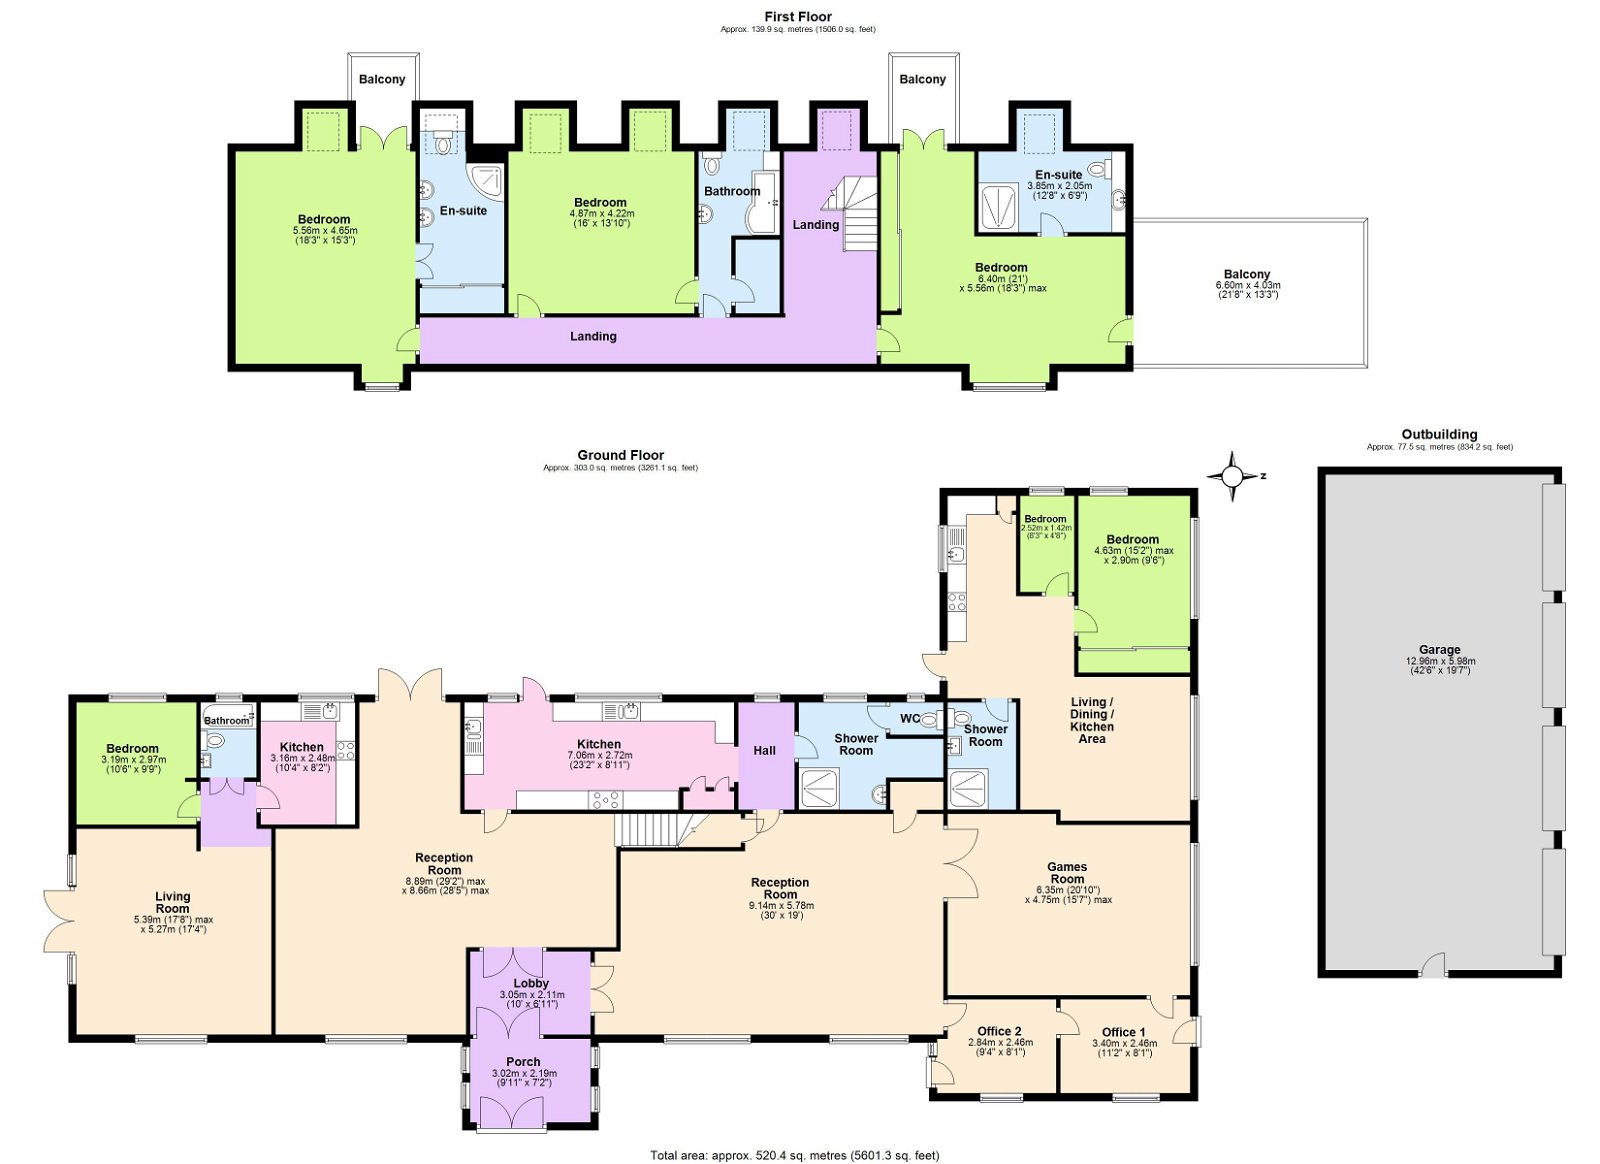 Floorplans For A Residential Property With An Attached Business in Flimwell